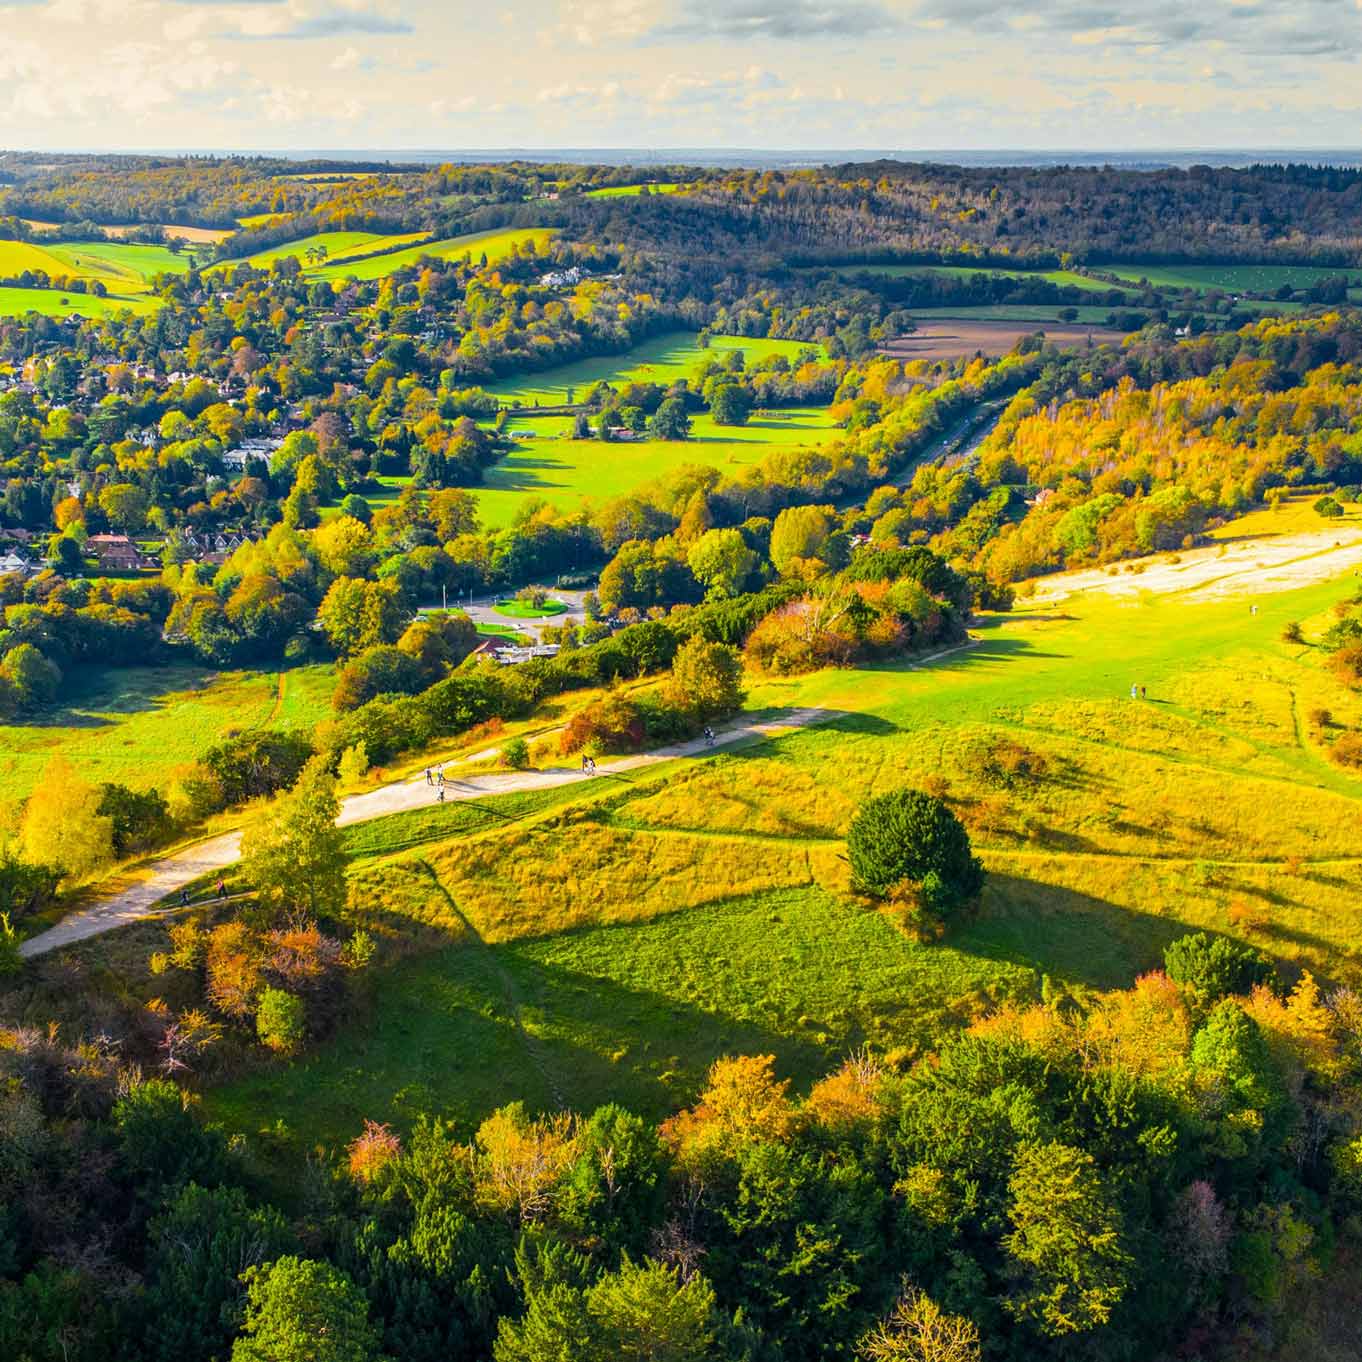 An aerial image of a English landscape, there are fields woods and green spaces. A visual metaphor for the topic of this piece: Contractual control agreements over land: Open consultation